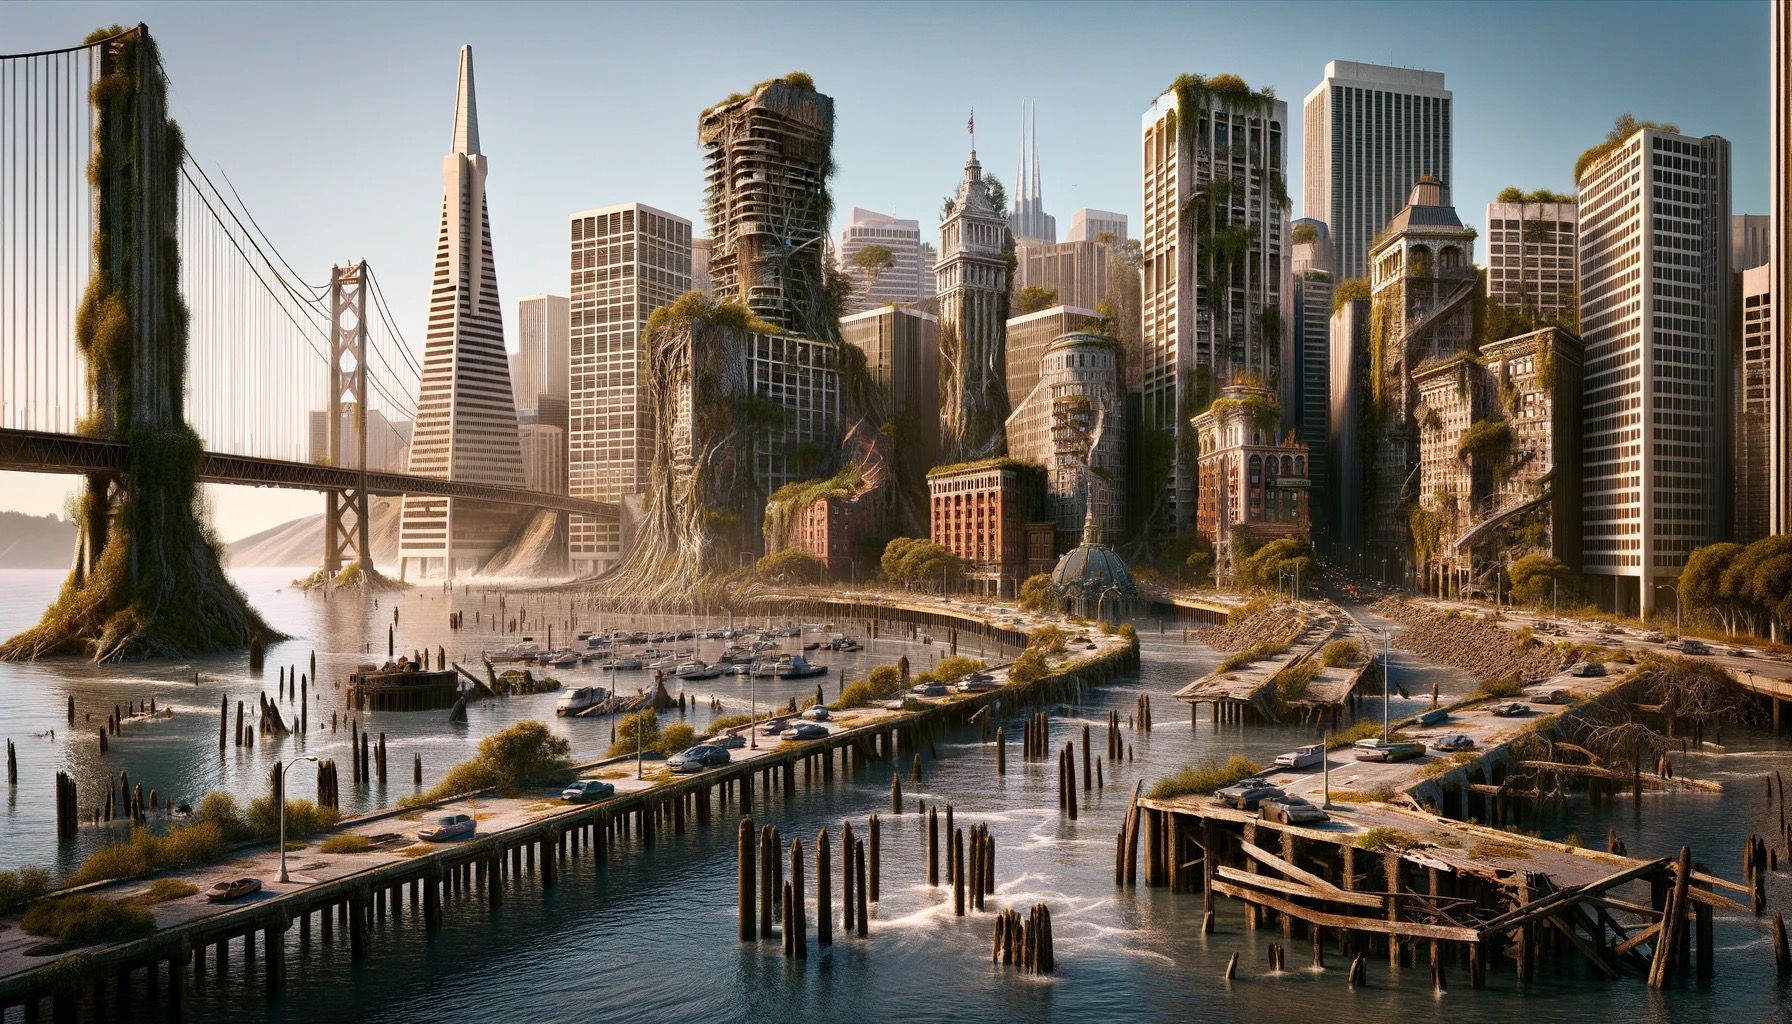 San Francisco 100 years from now